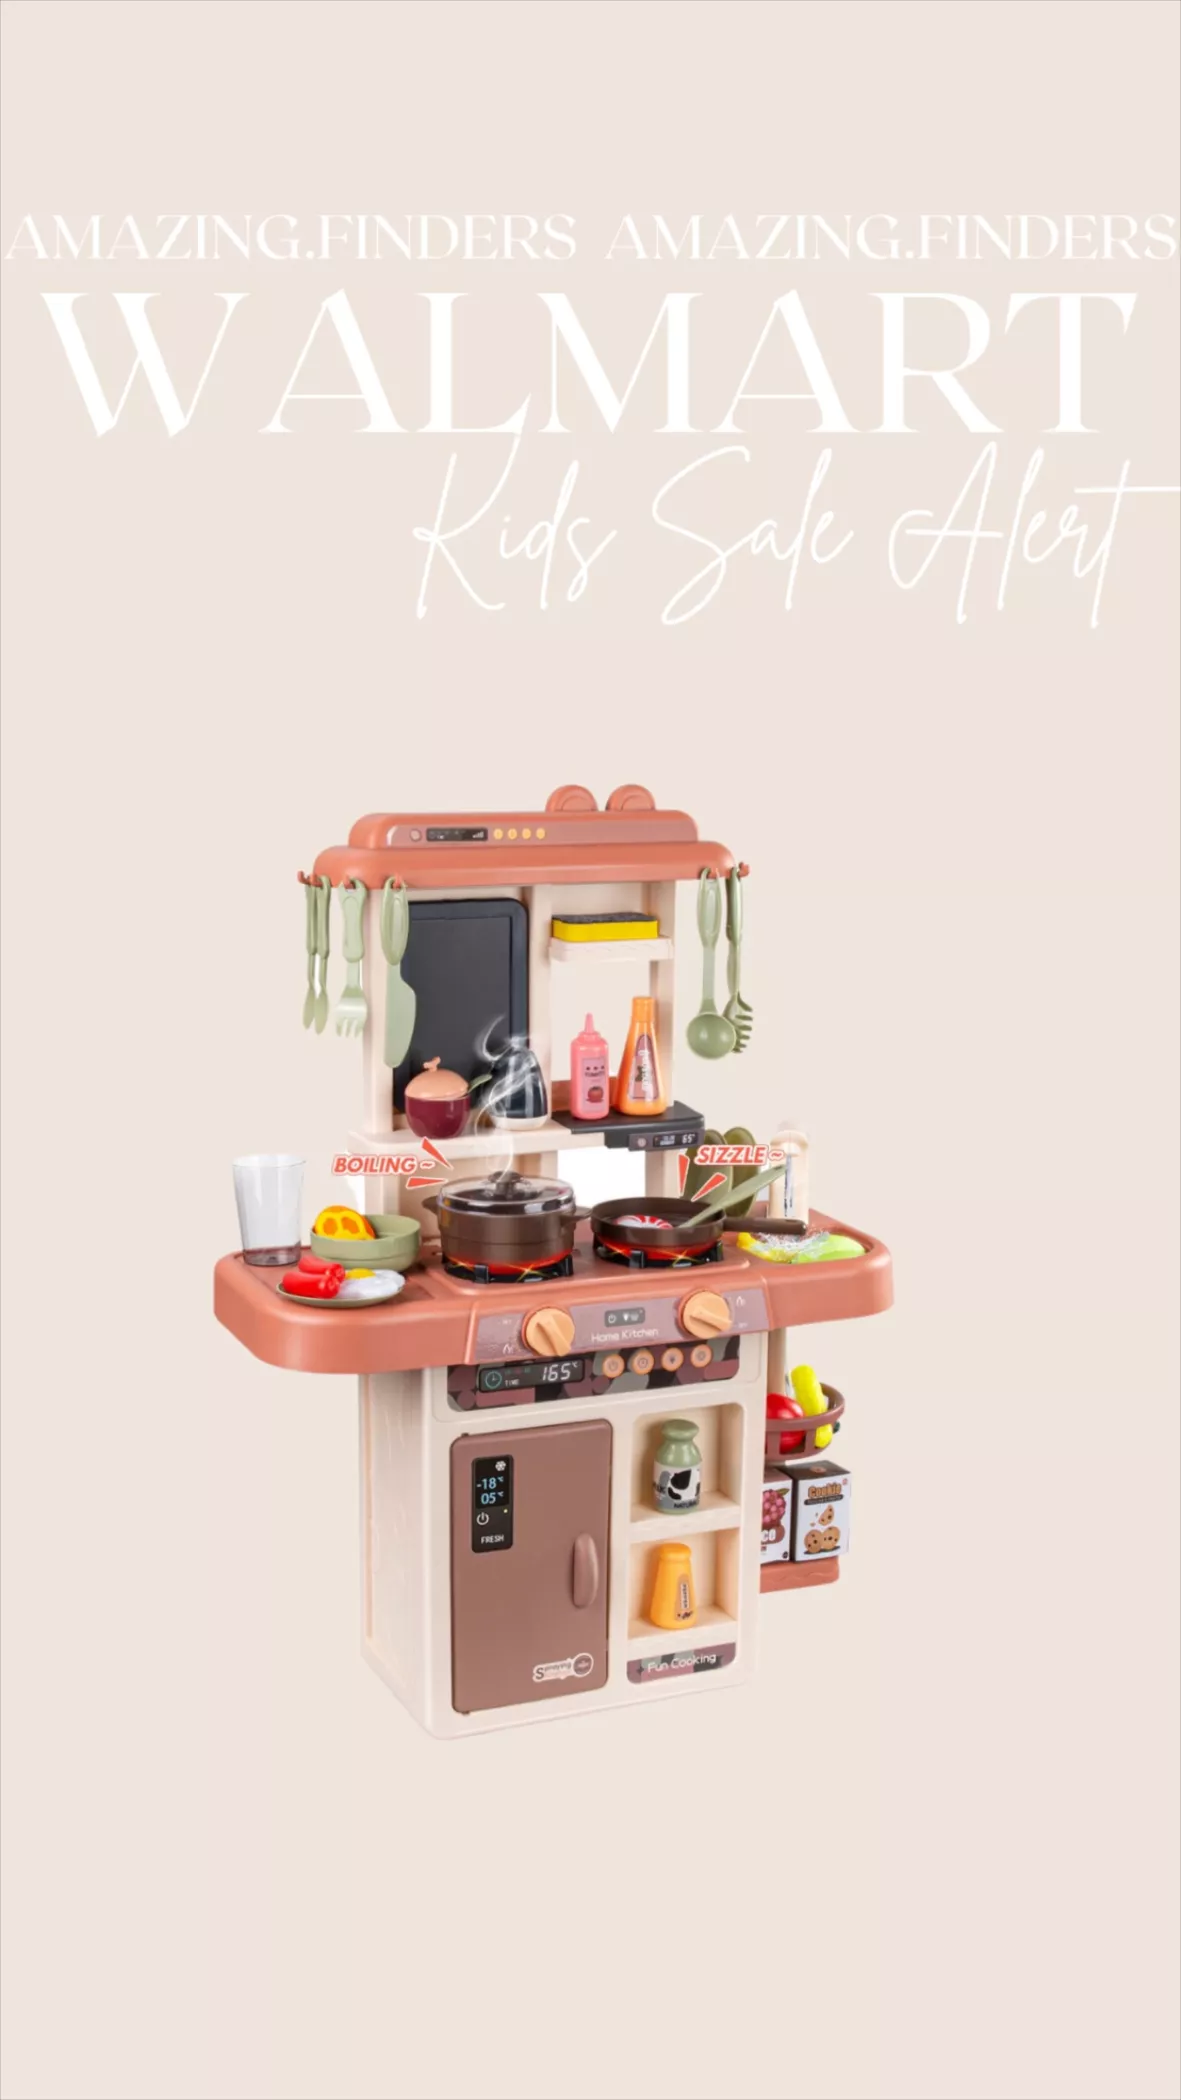 Wisairt Play Kitchen Set for Kids – WISAIRT